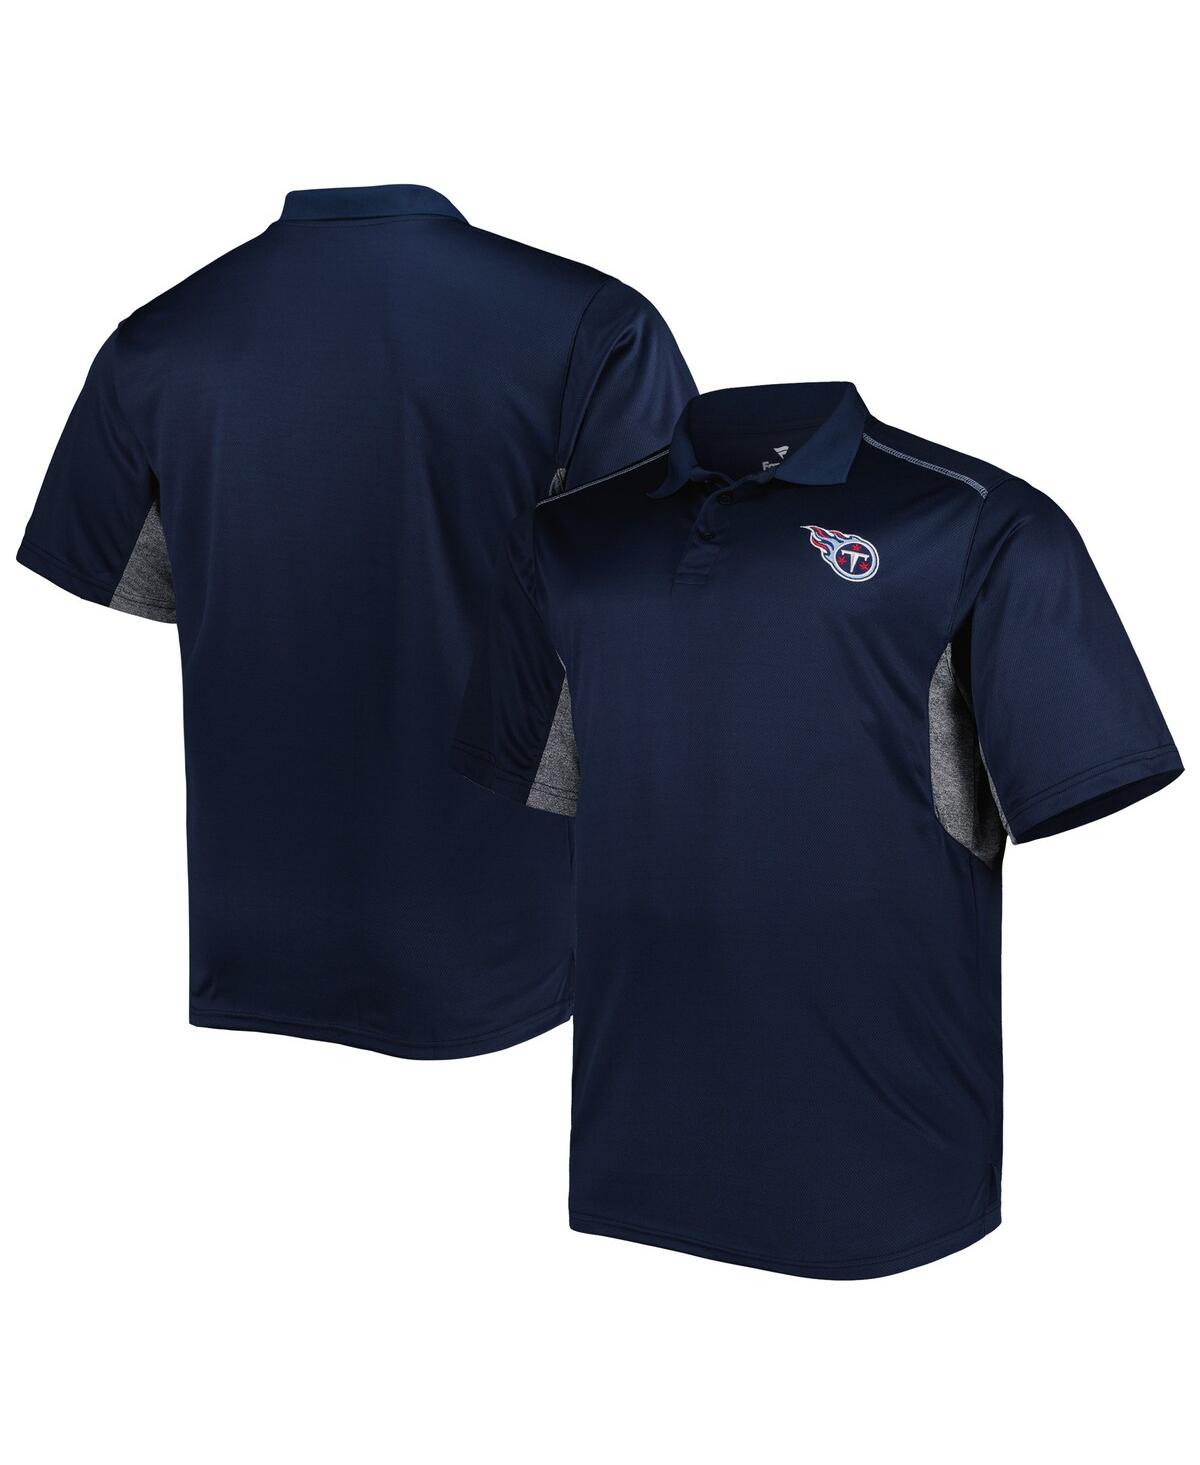 Fanatics Men's Navy Tennessee Titans Big And Tall Team Color Polo Shirt